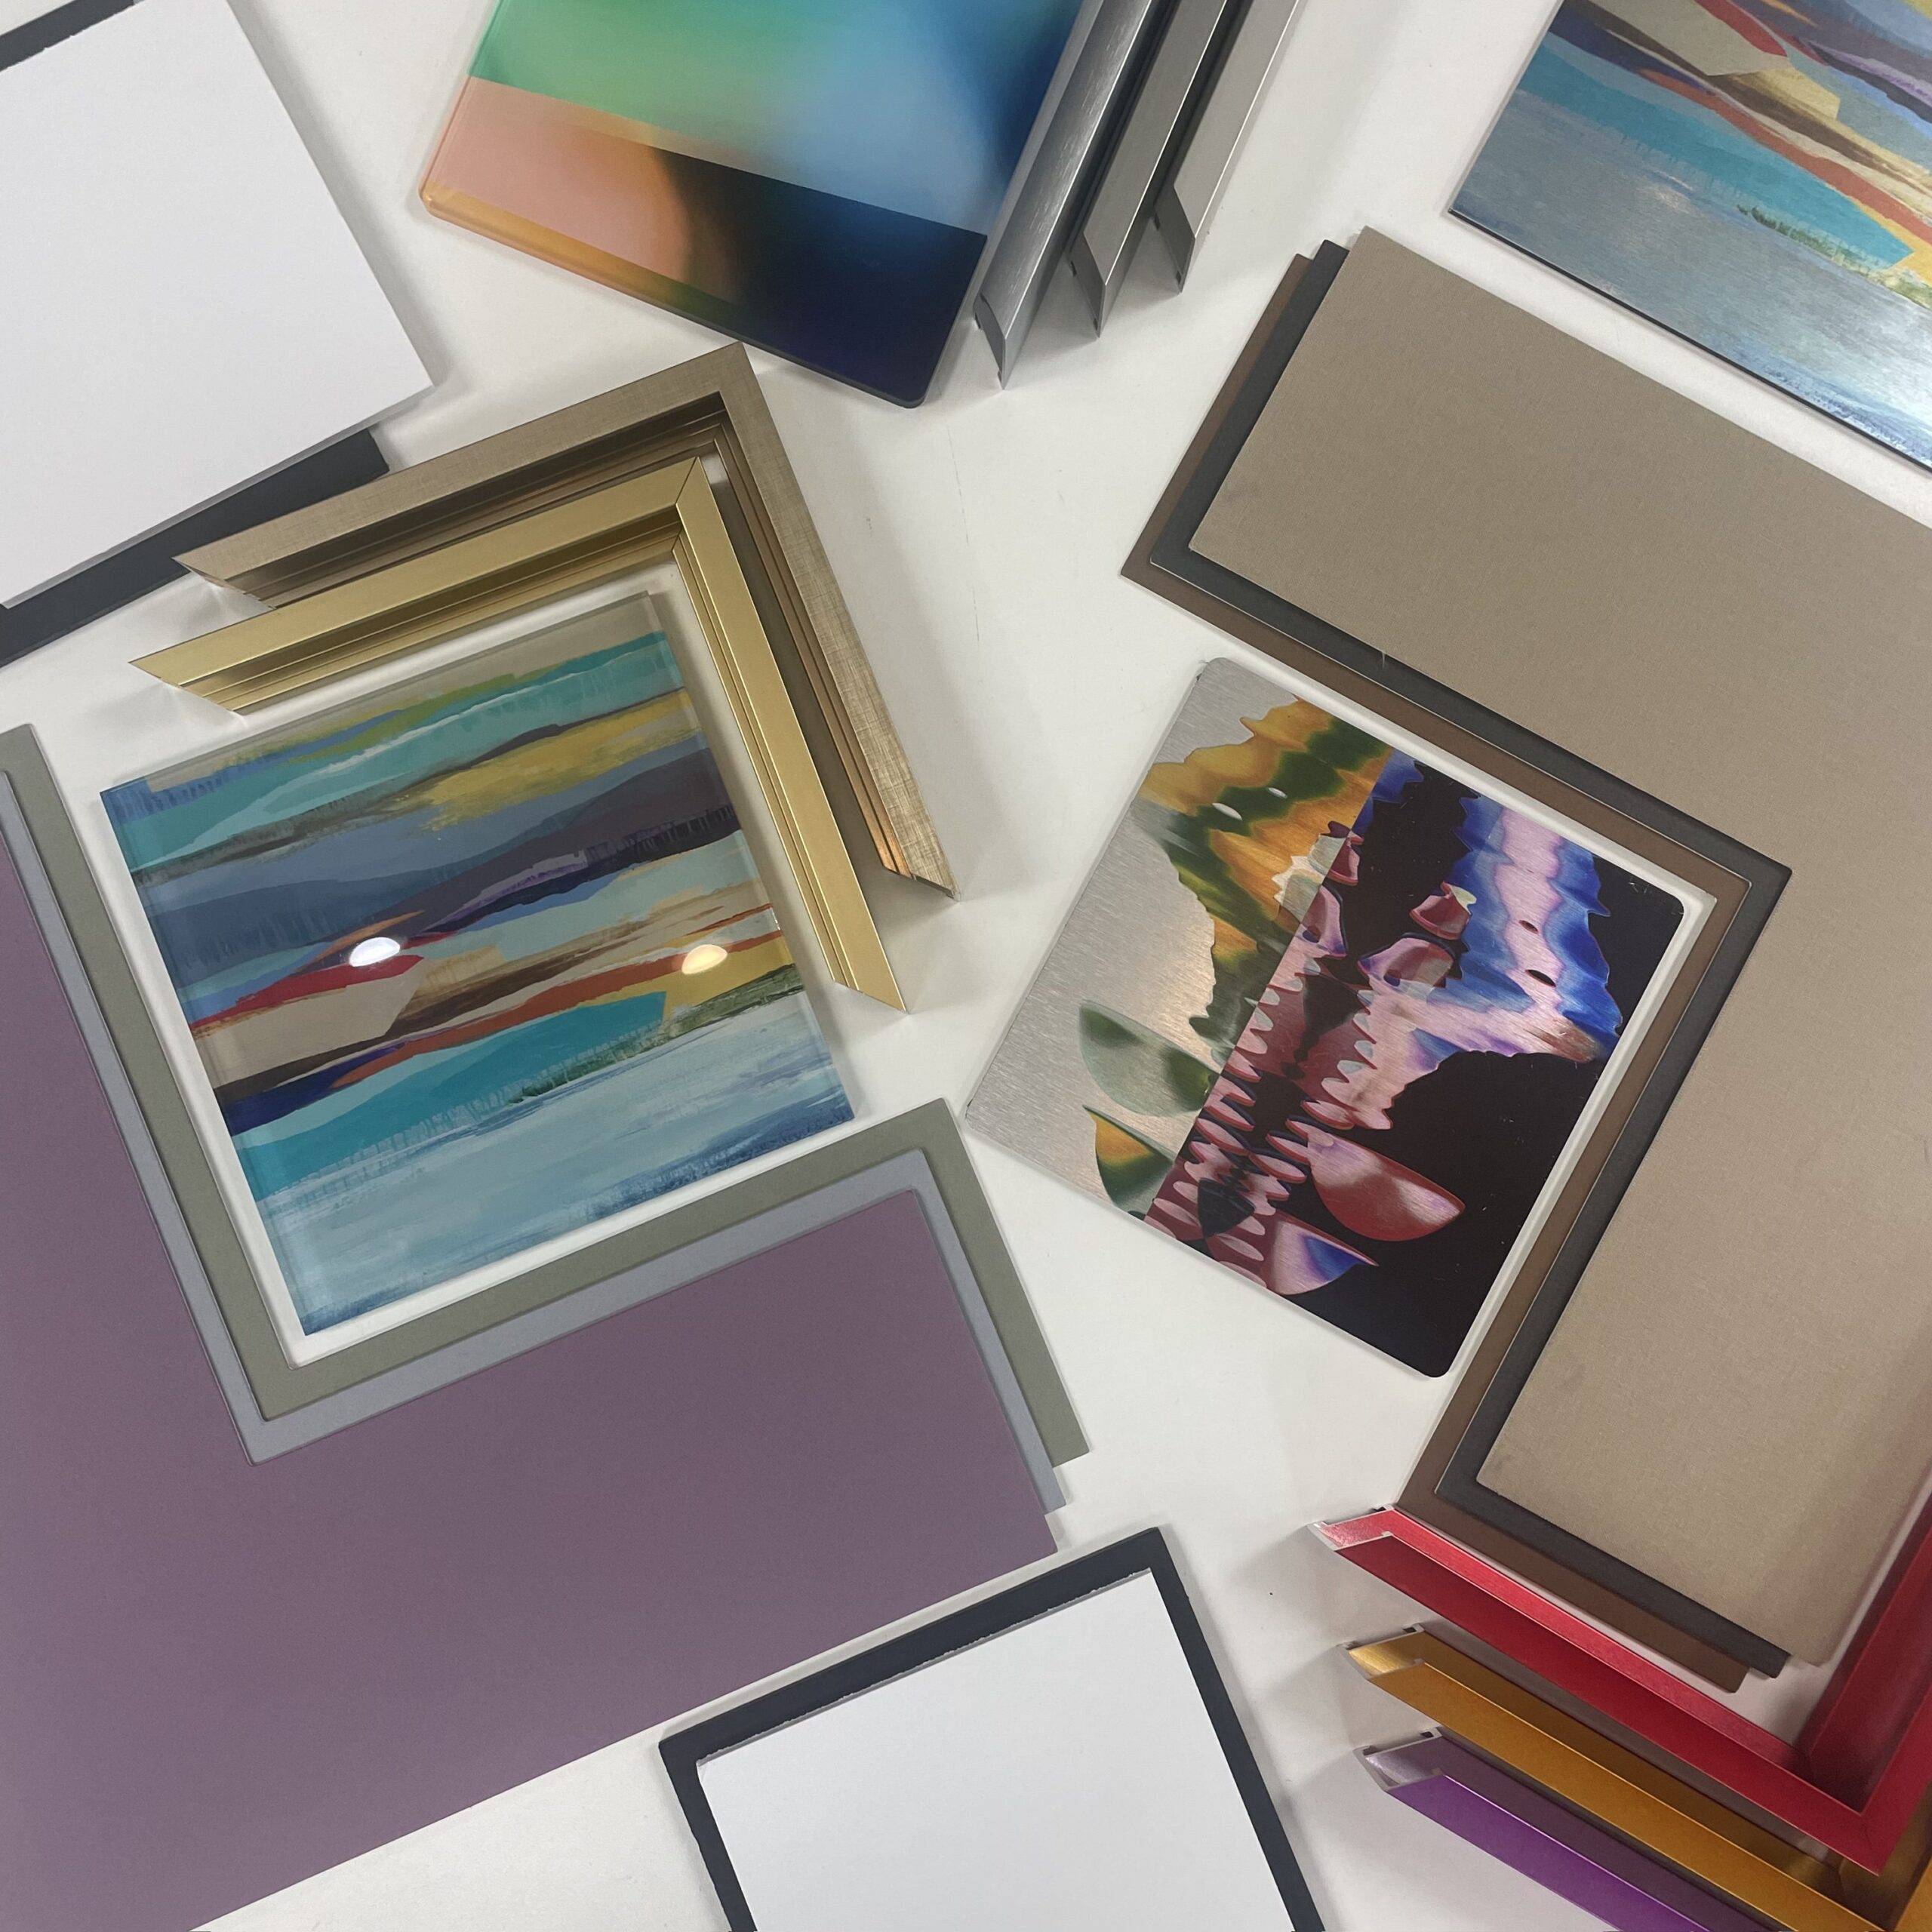 Mats art material foam-core and frames all displayed to show besting suited options